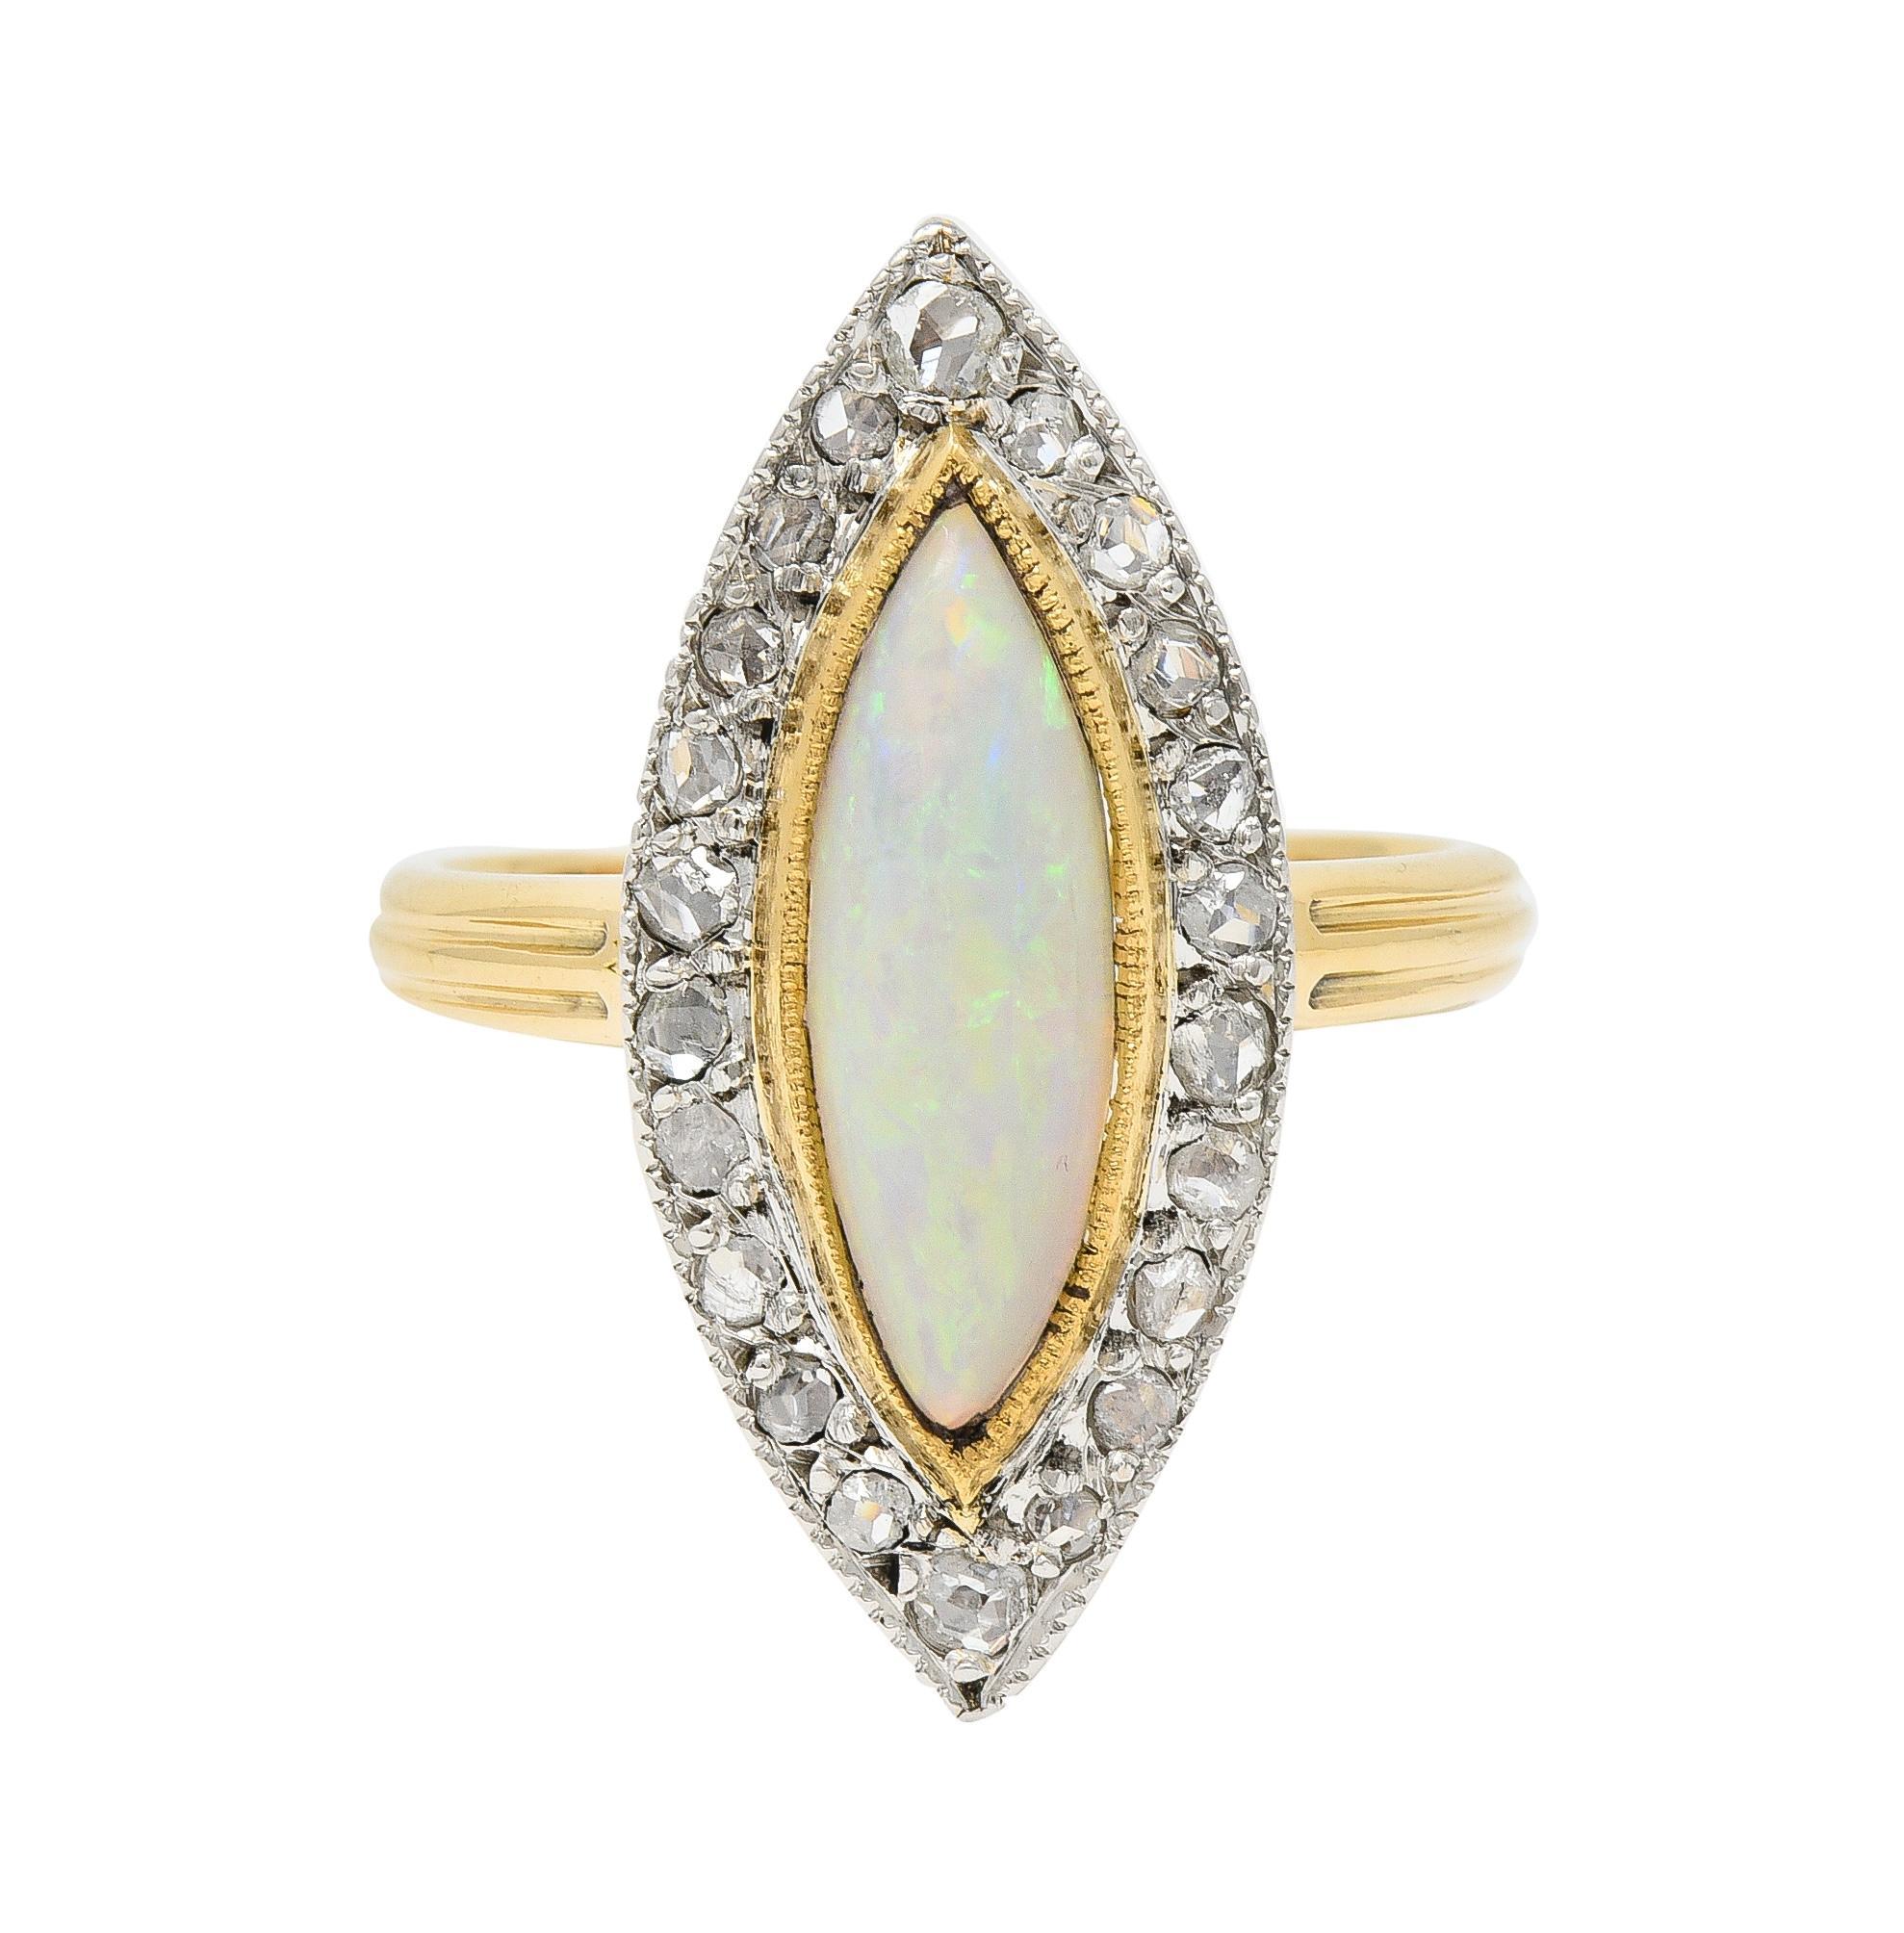 Centering a bezel set navette shape opal cabochon measuring 5.0 x 15.0 mm
Translucent white in body color with spectral play-of-color  
Accented by a halo surround of rose cut diamonds bead set in platinum
Weighing approximately 0.48 carat total -